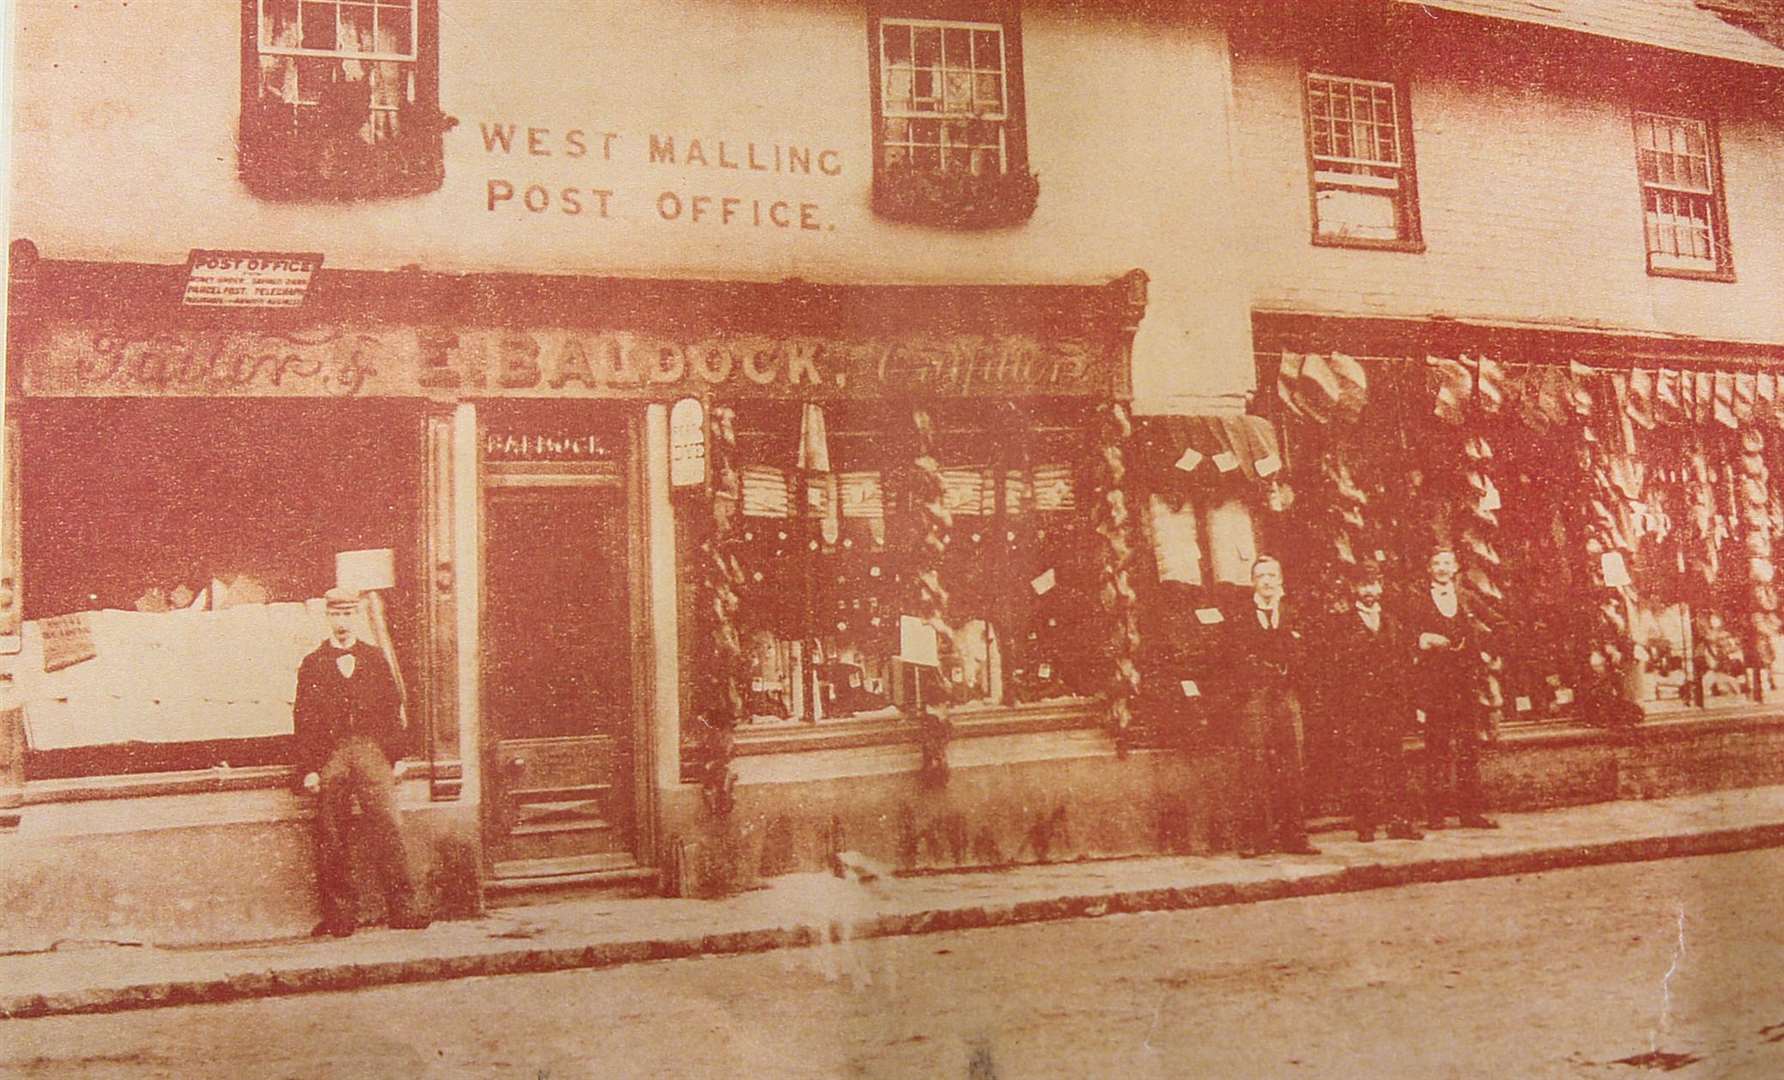 The original shop, on the corner of Swan Street, which was established in 1878